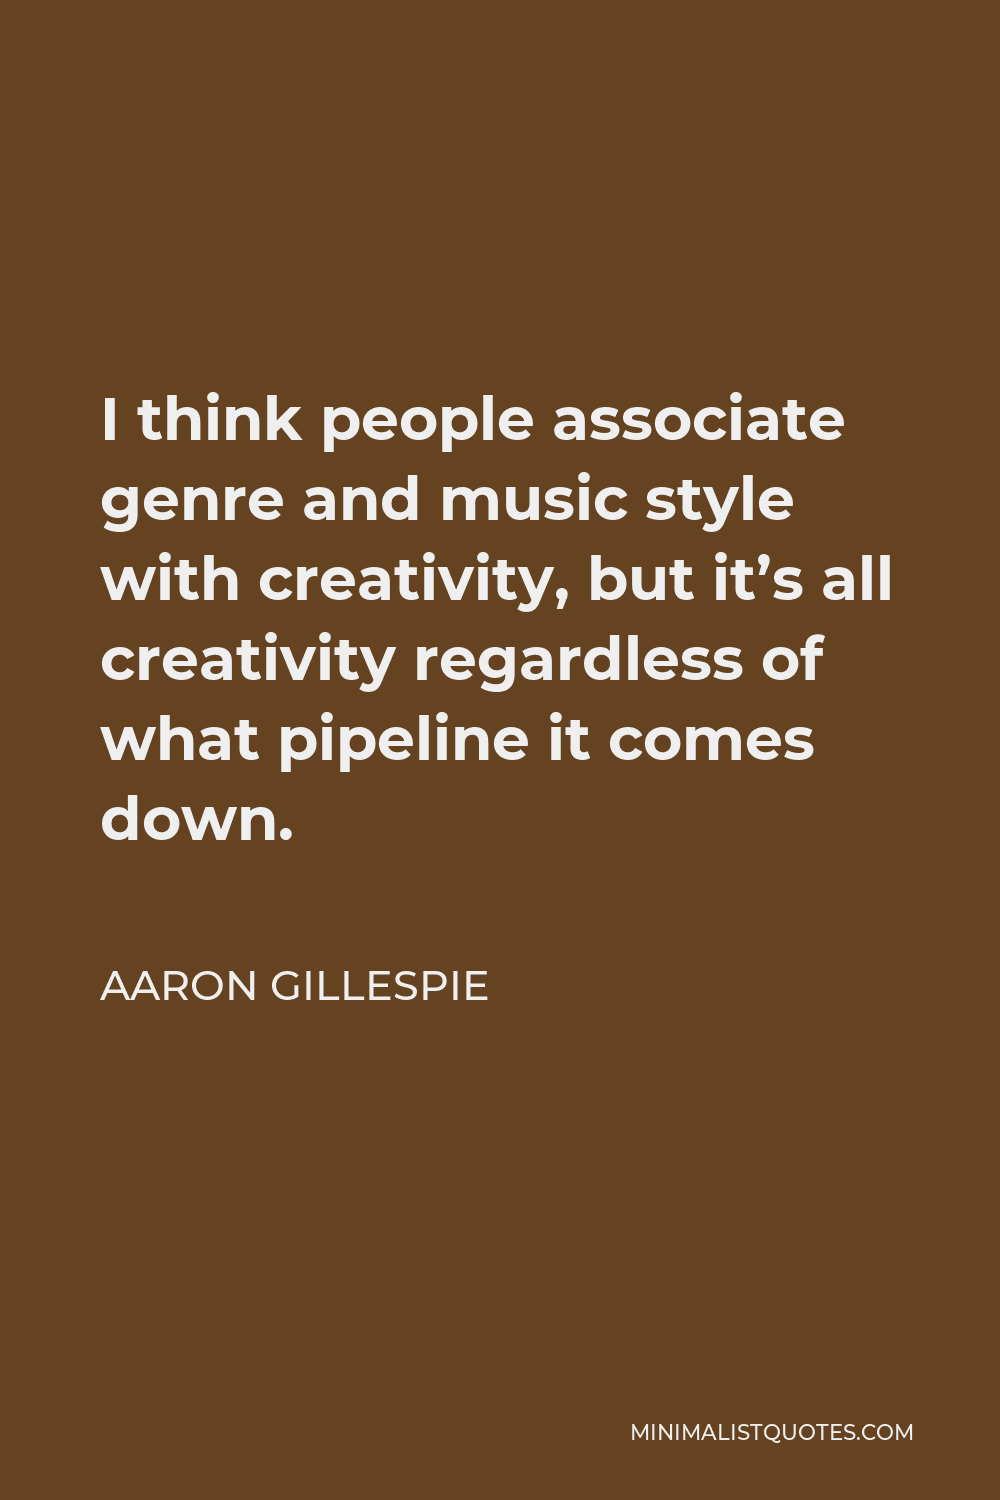 Aaron Gillespie Quote - I think people associate genre and music style with creativity, but it’s all creativity regardless of what pipeline it comes down.